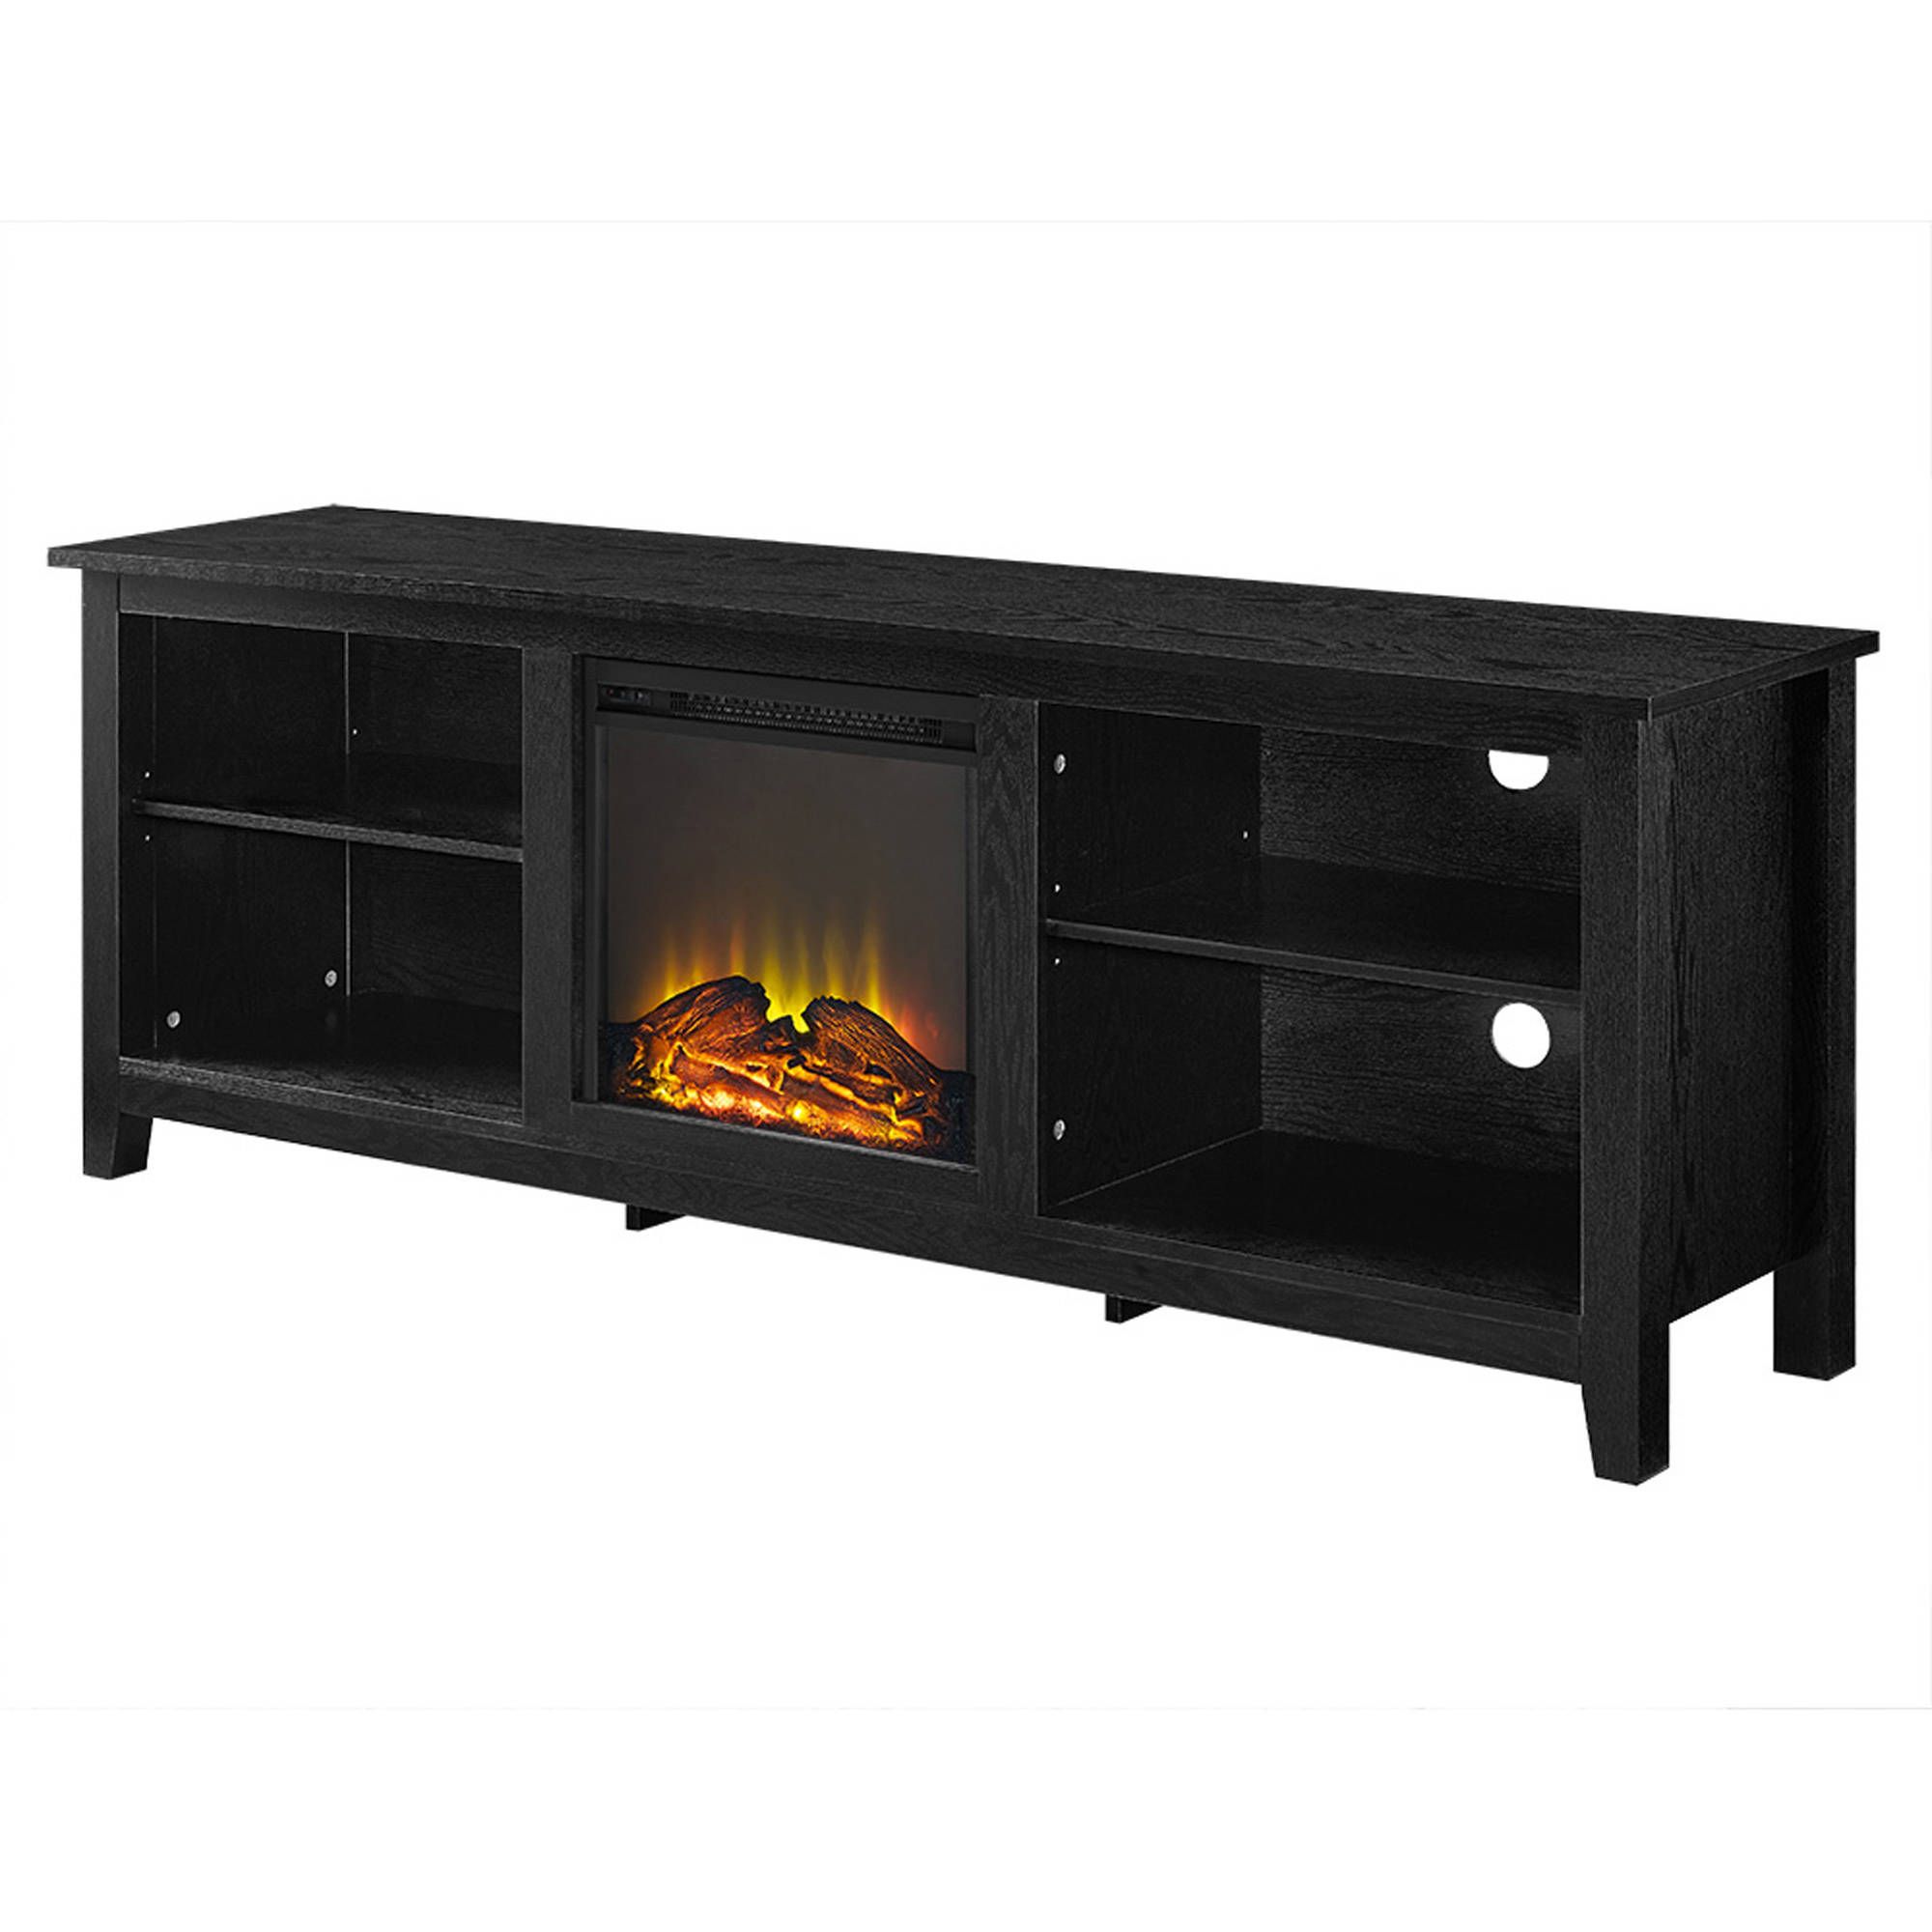 Dark Wood Tv Stands With Newest We Furniture Az70fp18bl 70" Wood Fireplace Tv Stand Black (View 16 of 20)